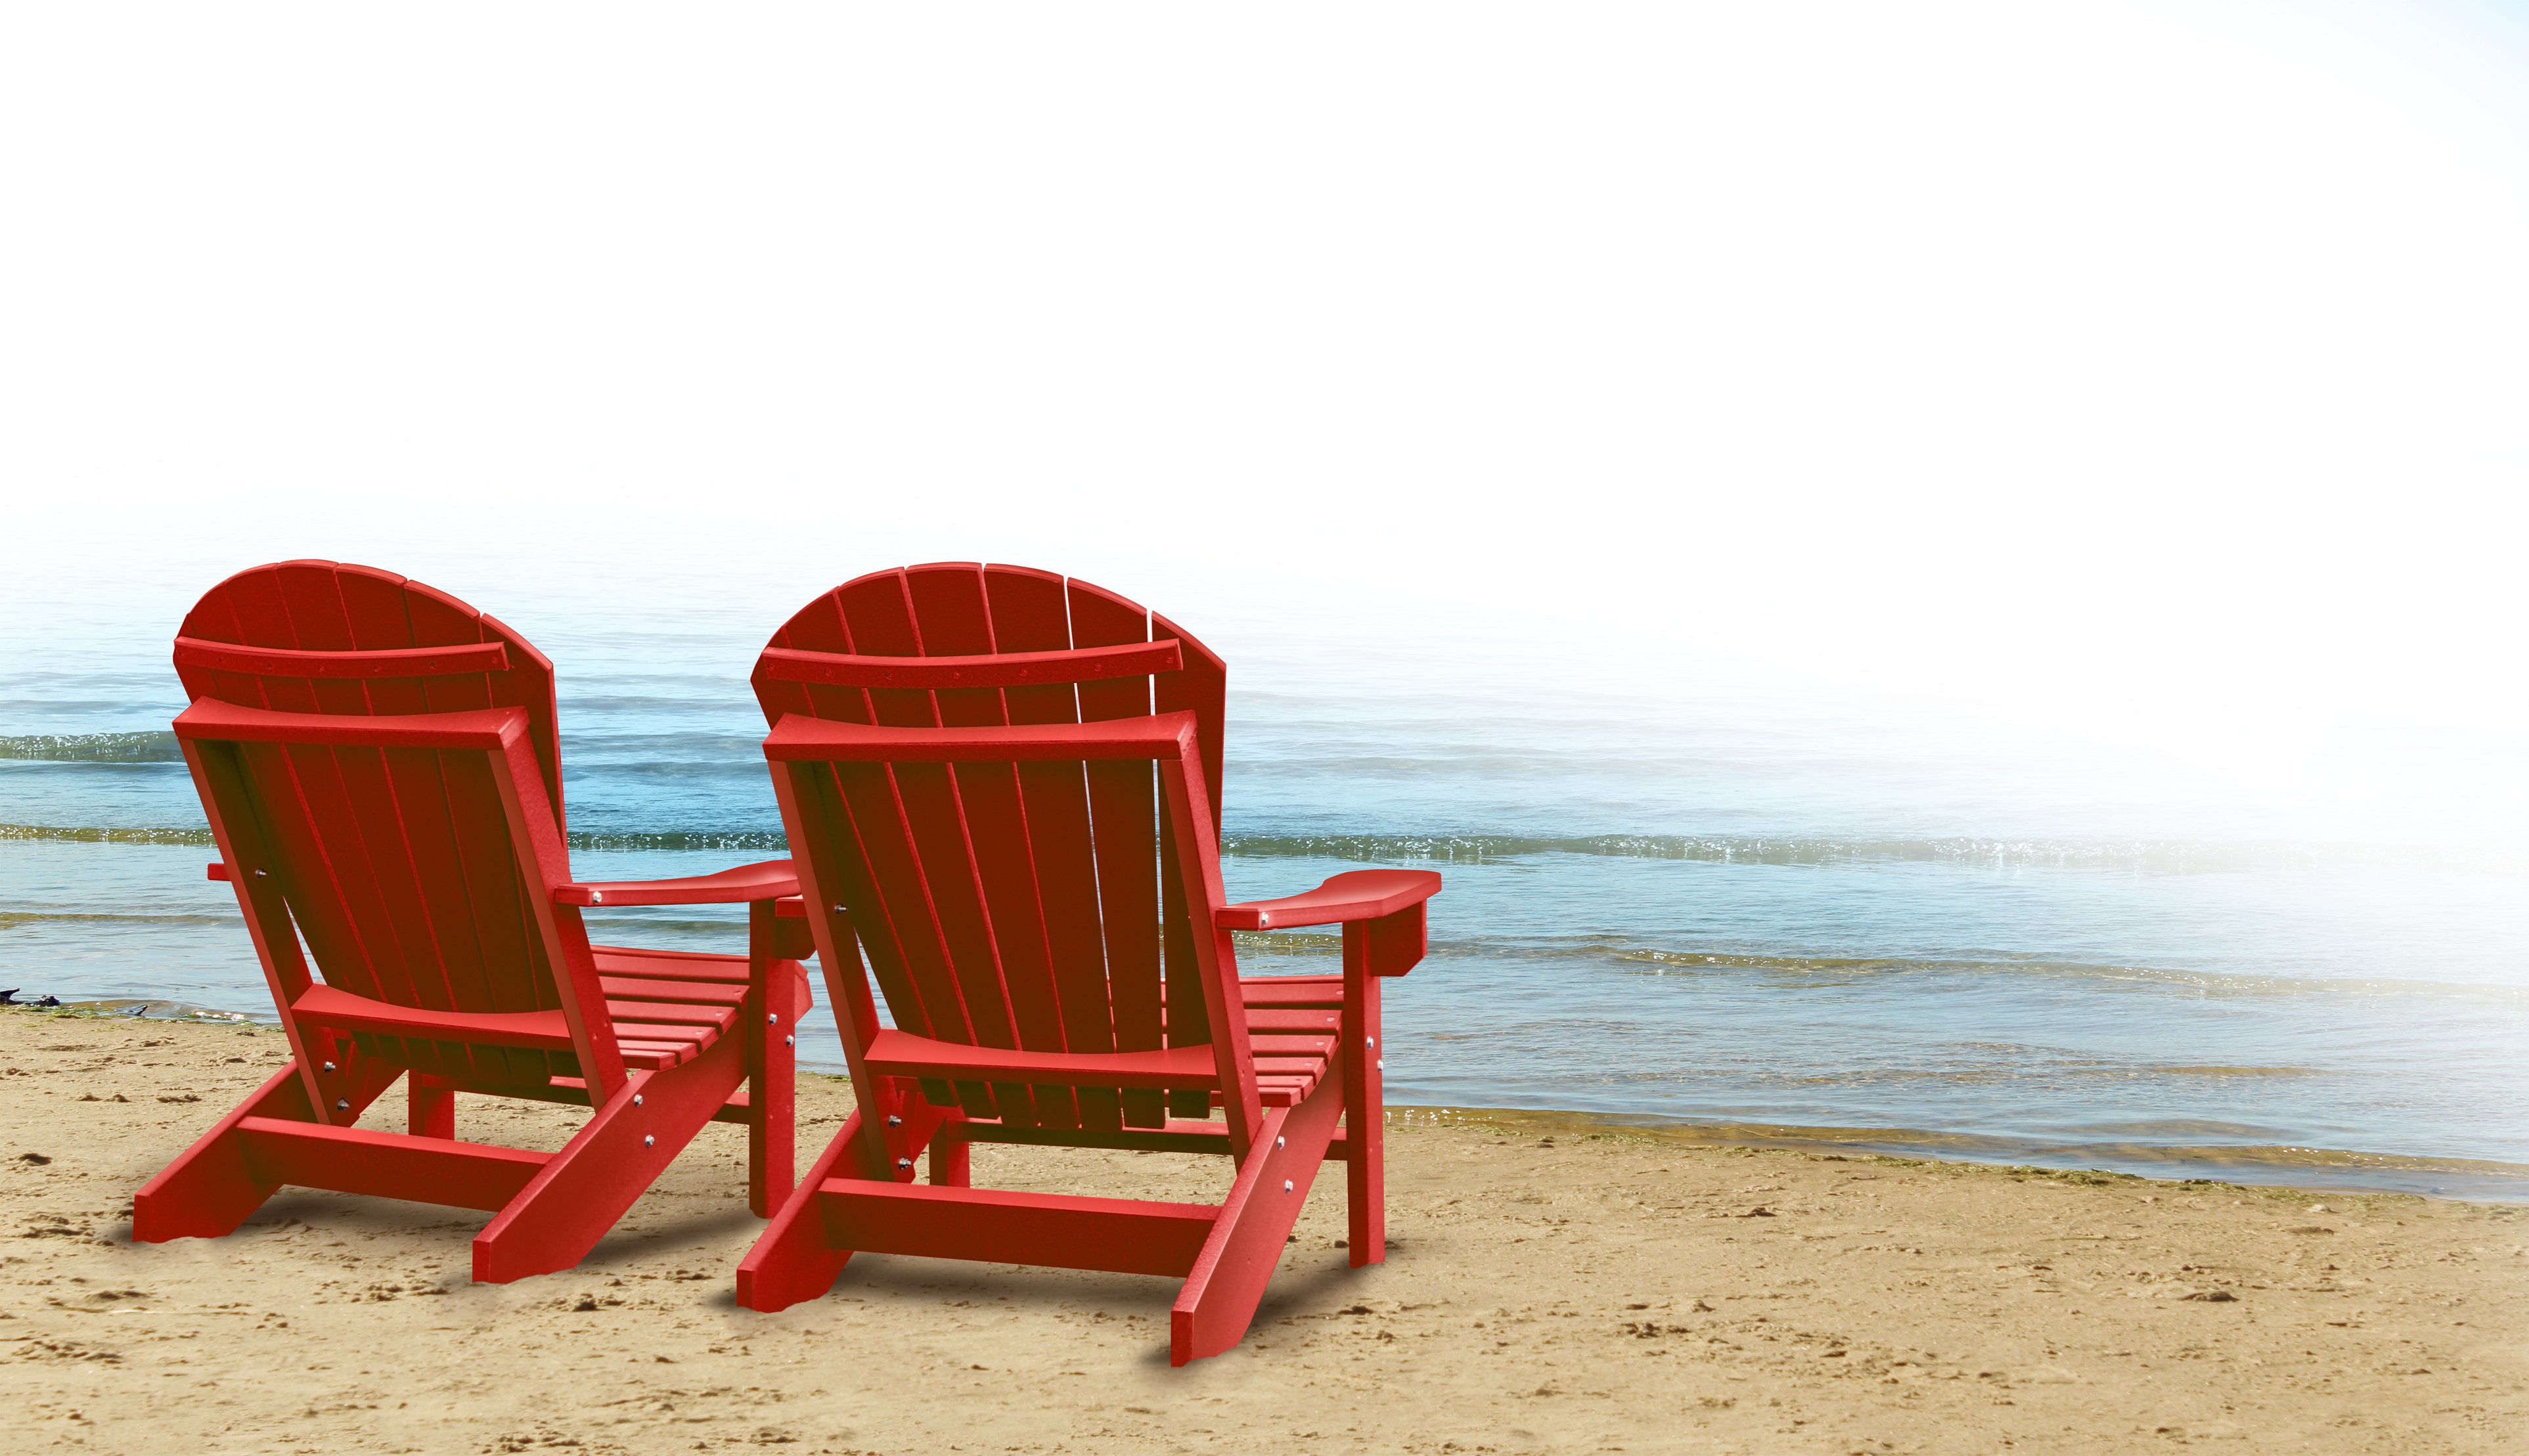 Two red wooden beach chairs sitting on the sand